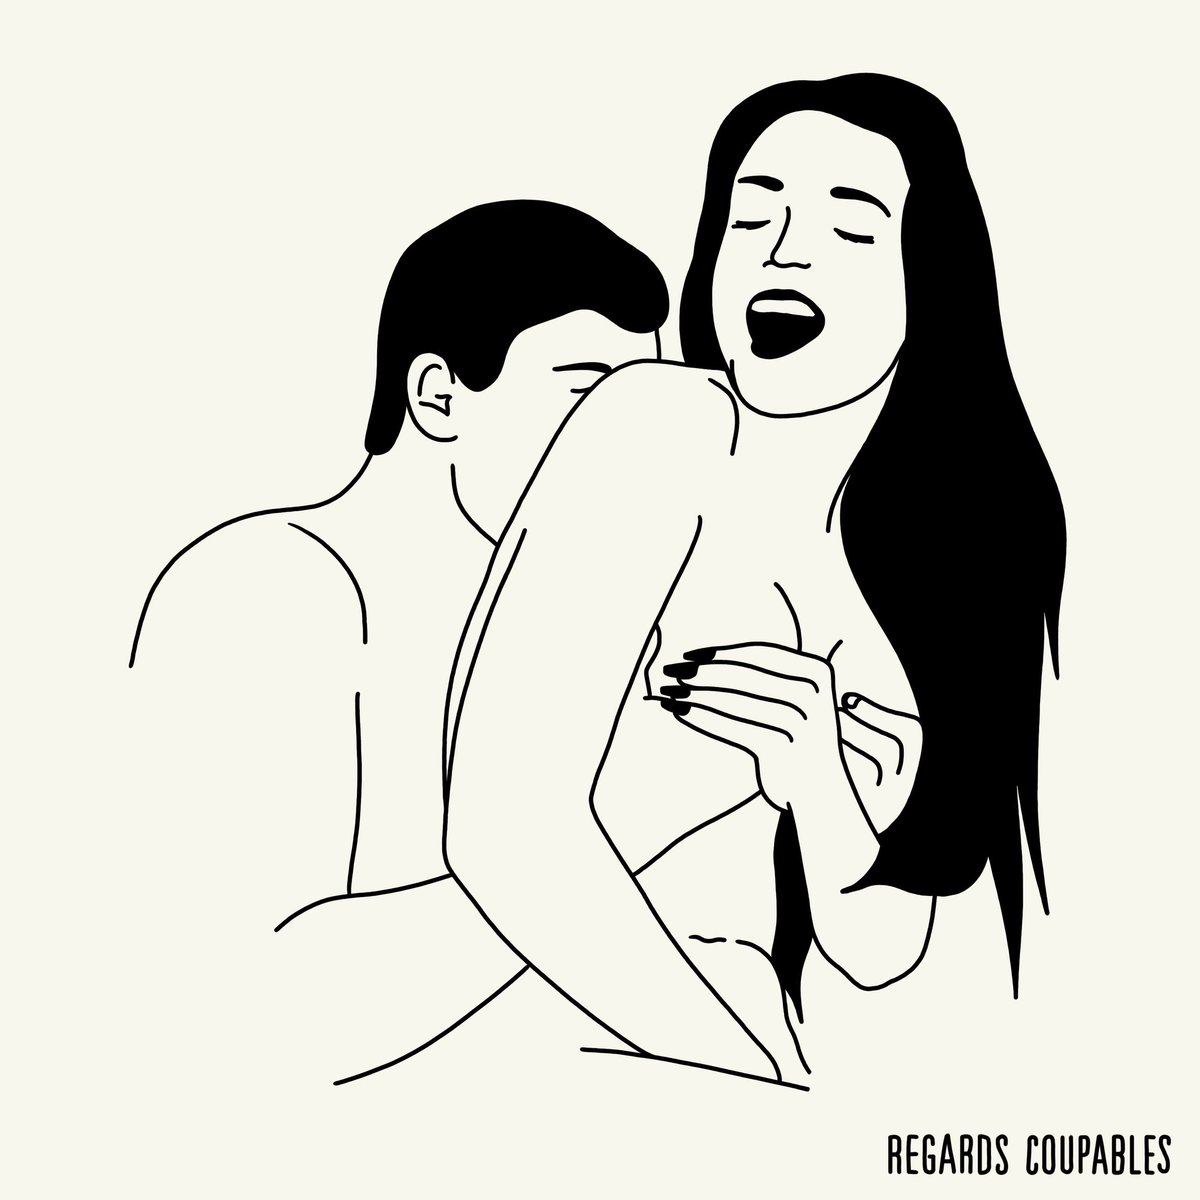 Now move up. Don’t focus just only on her nipples• Gently push her brezz together and kiss the center of her chest, along her breastbone. At the same time, softly squeeze her breasts to help make them more sensitive. KISS HER NECK   &  SQUEEZE THAT BOOBS